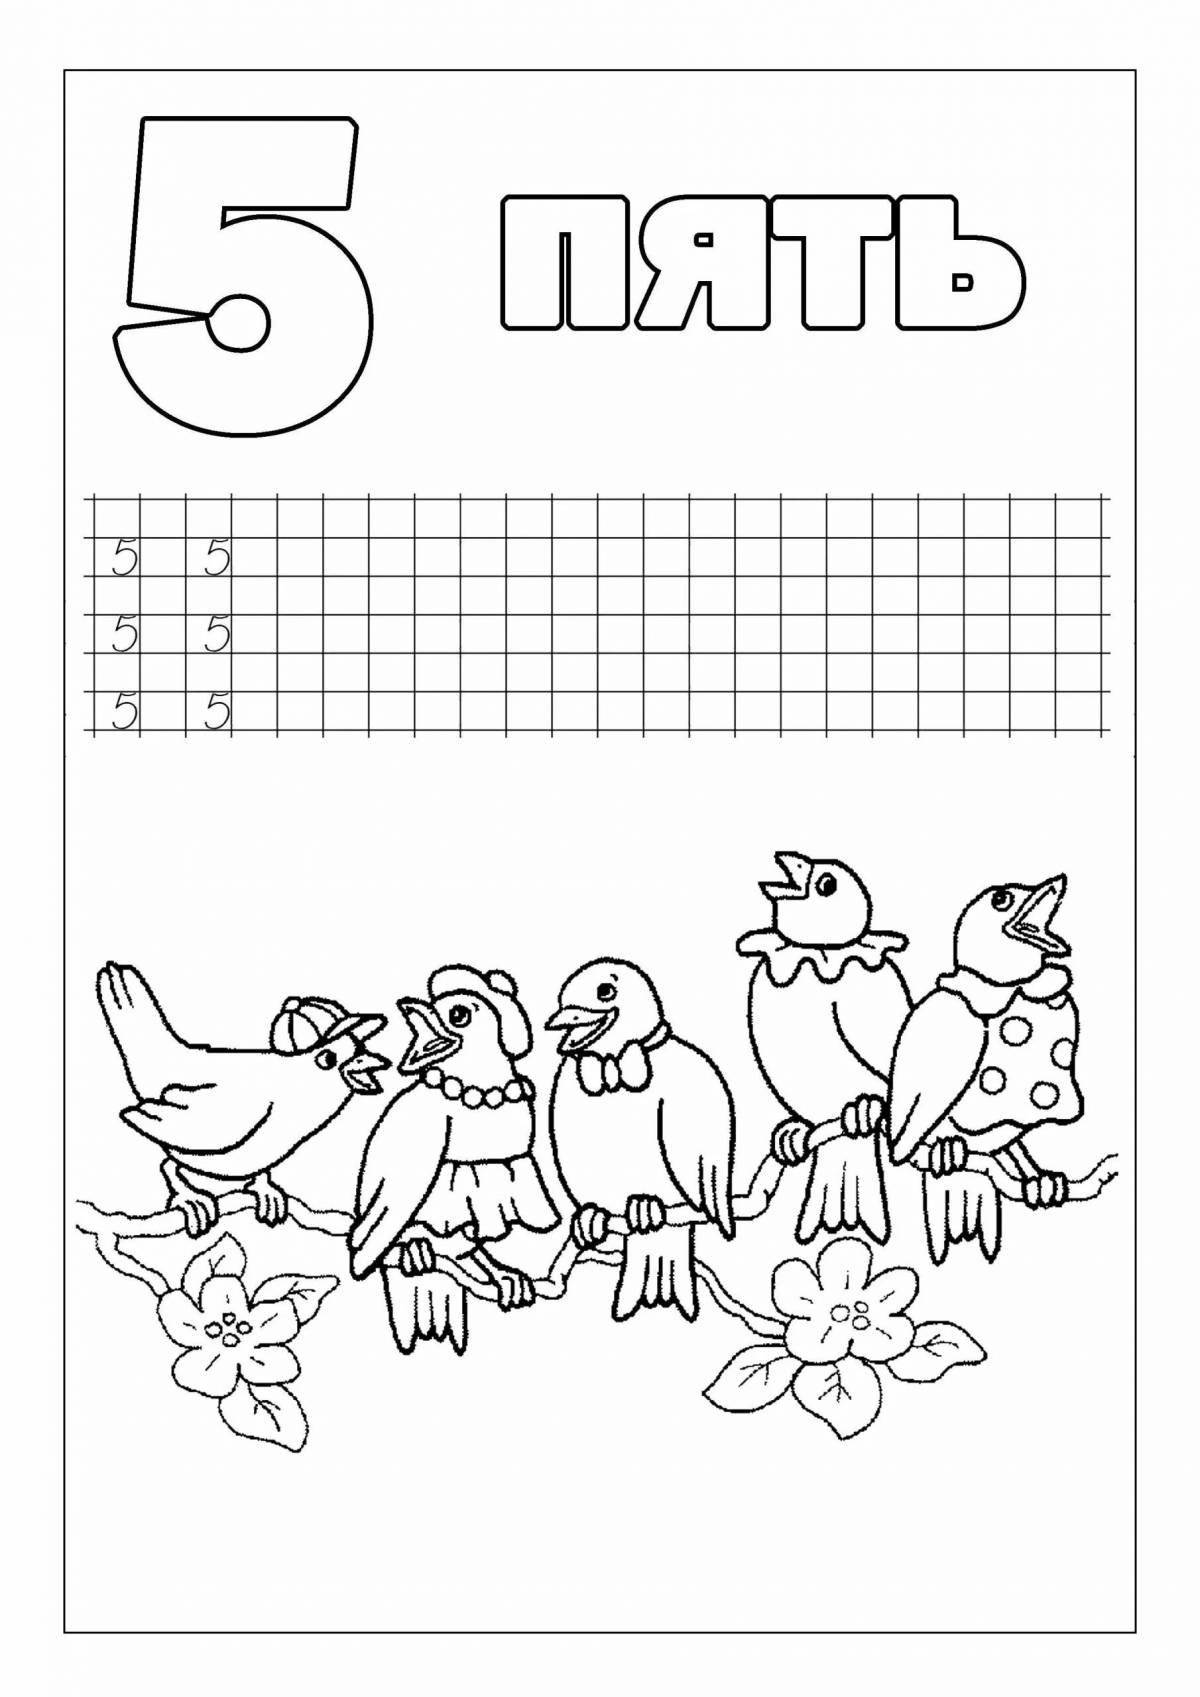 Bright number 5 coloring for kids